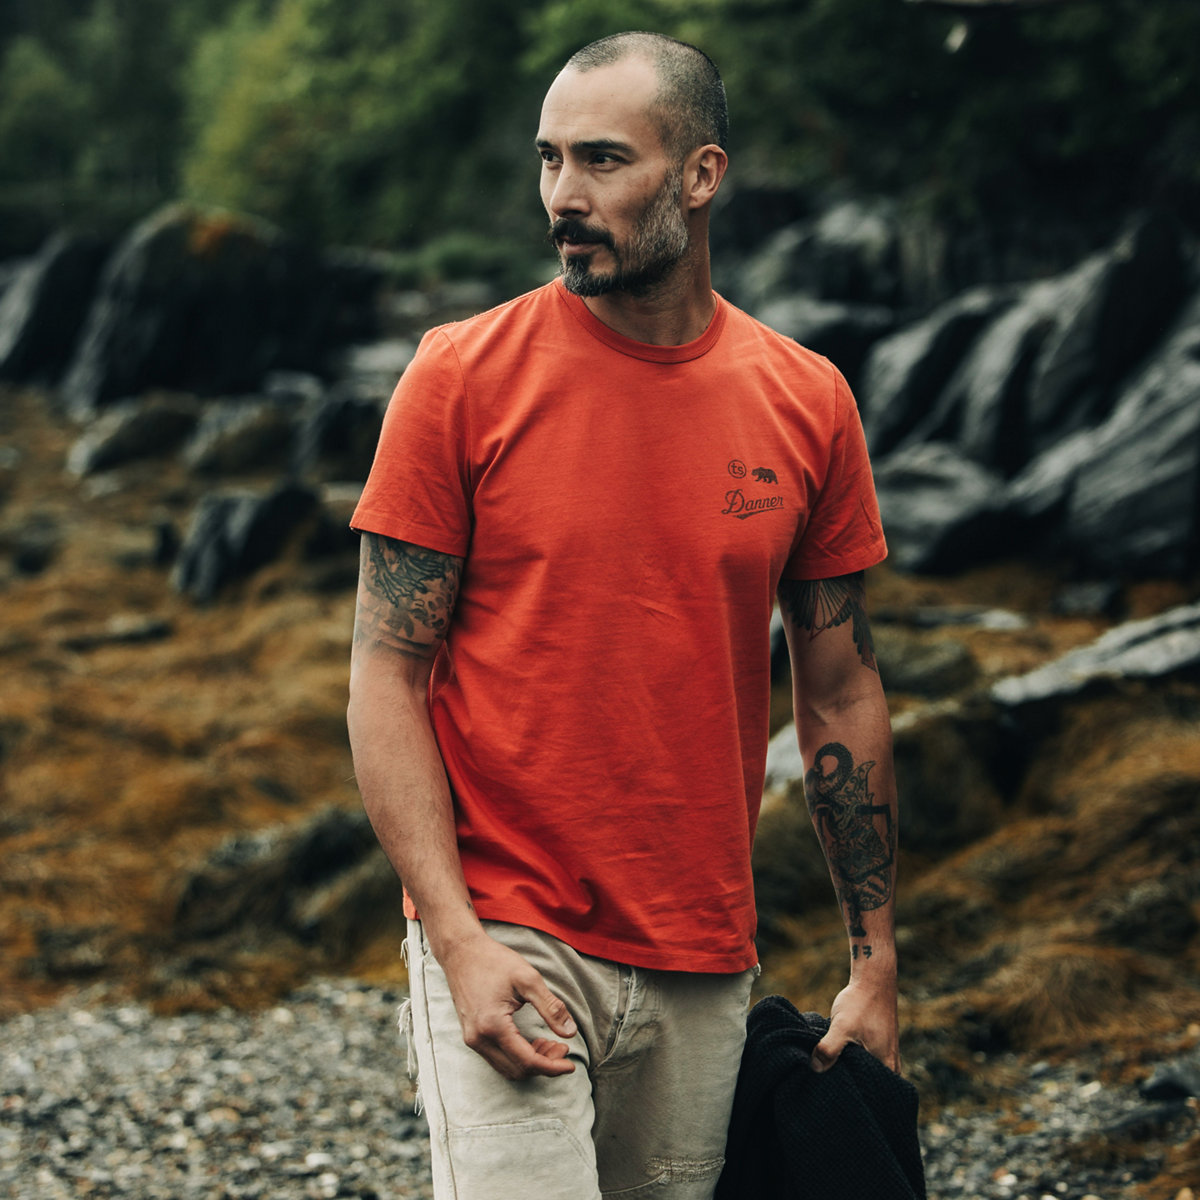 Danner - The Organic Cotton Tee Danner X Taylor Stitch